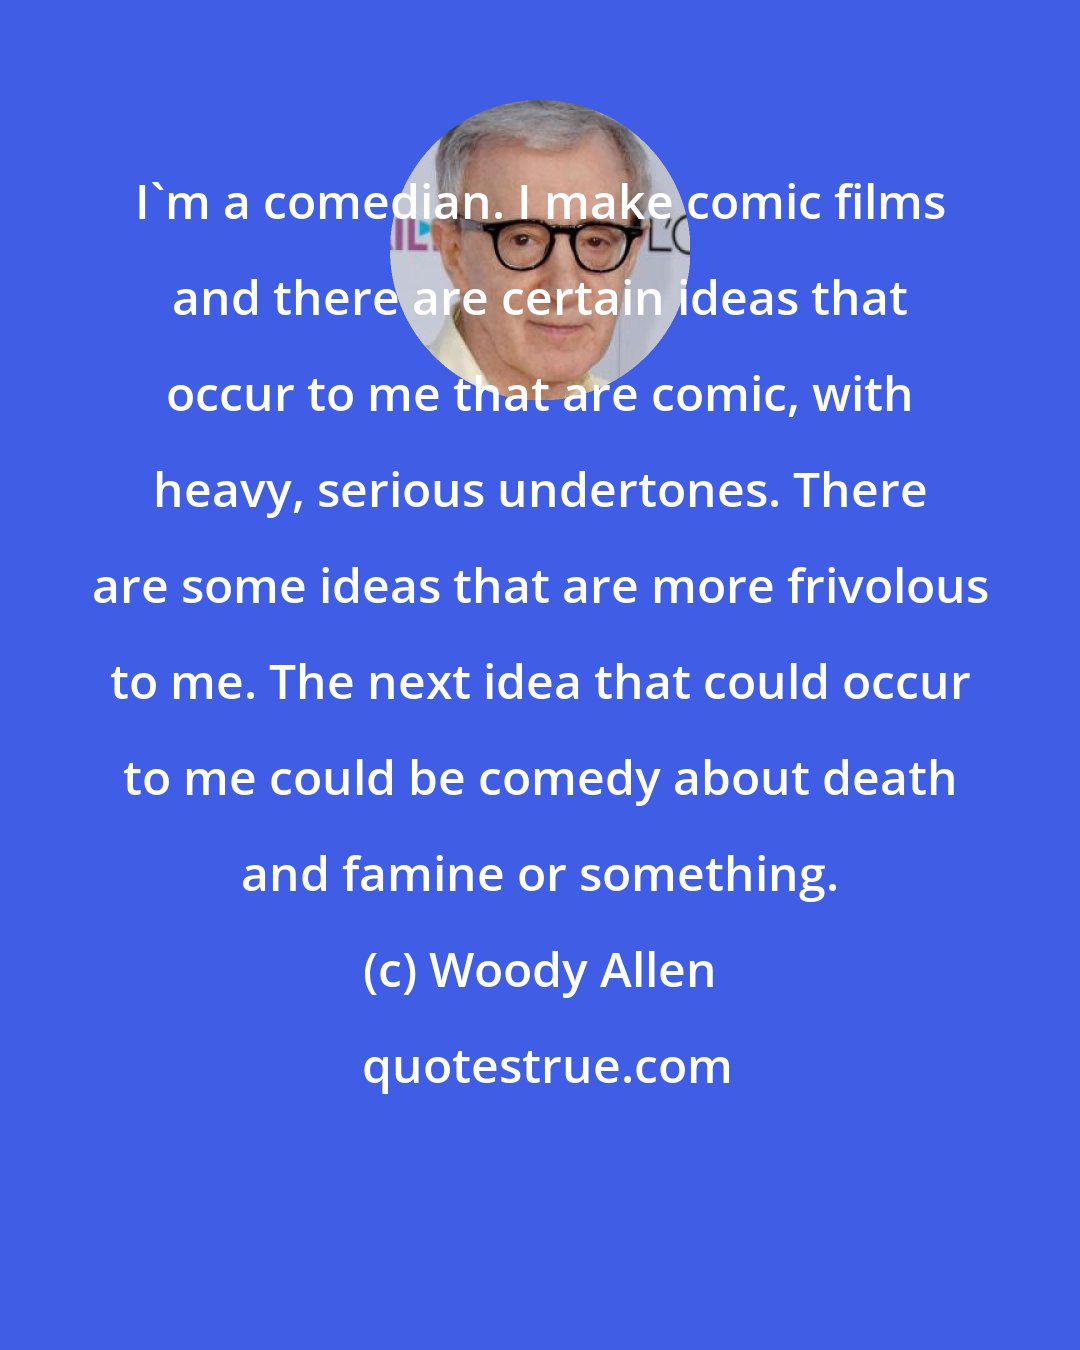 Woody Allen: I'm a comedian. I make comic films and there are certain ideas that occur to me that are comic, with heavy, serious undertones. There are some ideas that are more frivolous to me. The next idea that could occur to me could be comedy about death and famine or something.